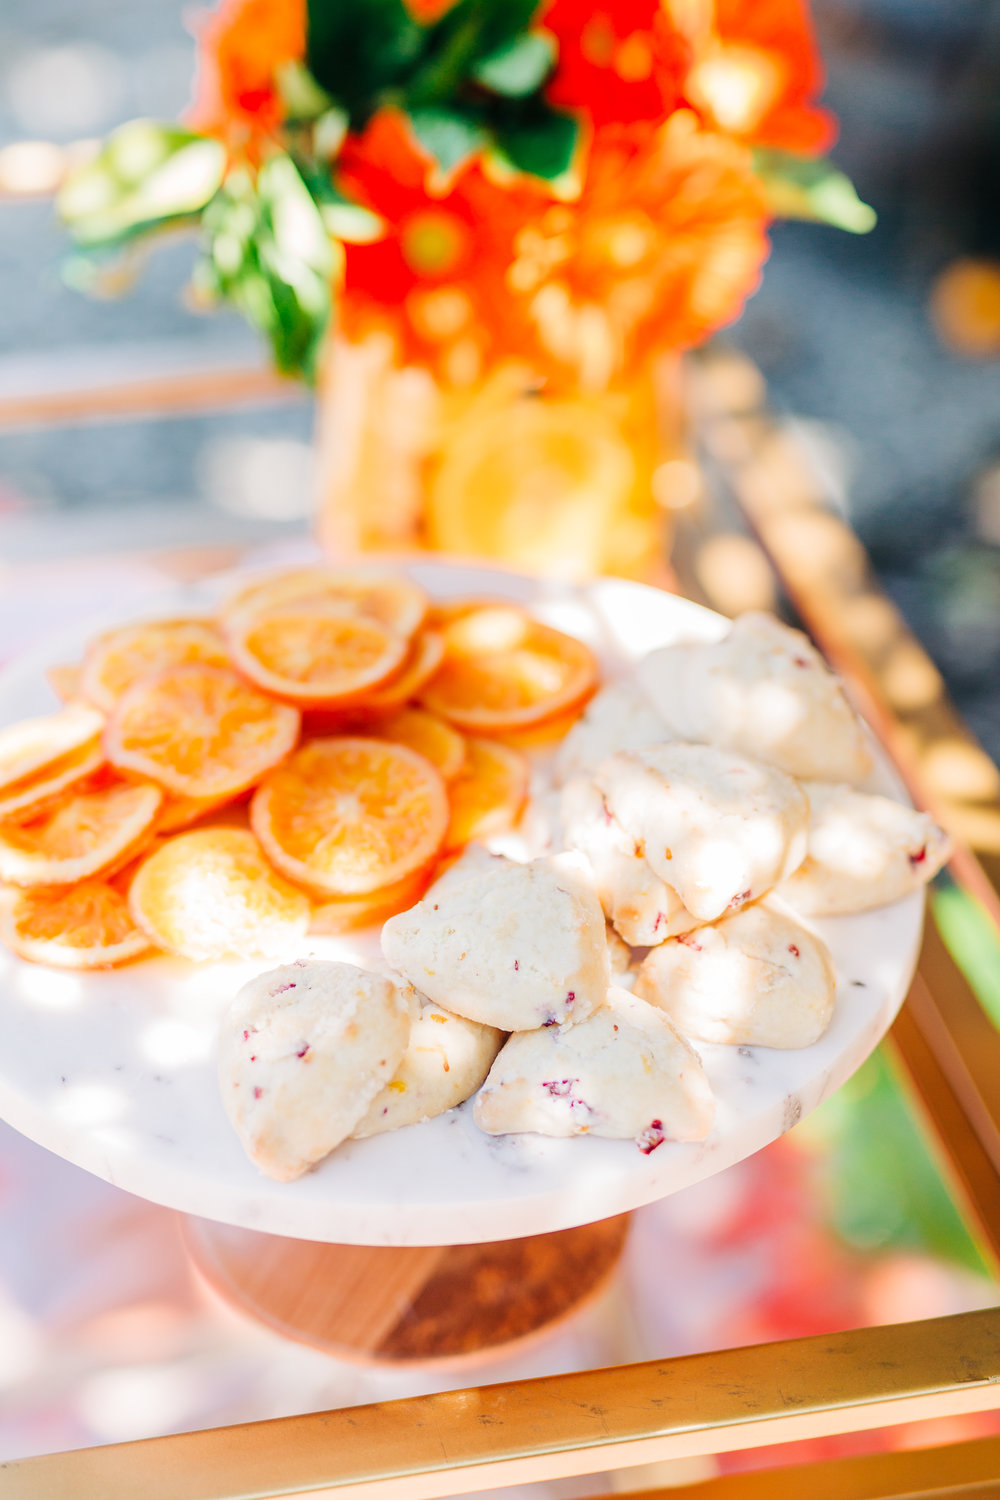 Bar cart decorations for orange picking party. Candied oranges and orange scones8.jpg